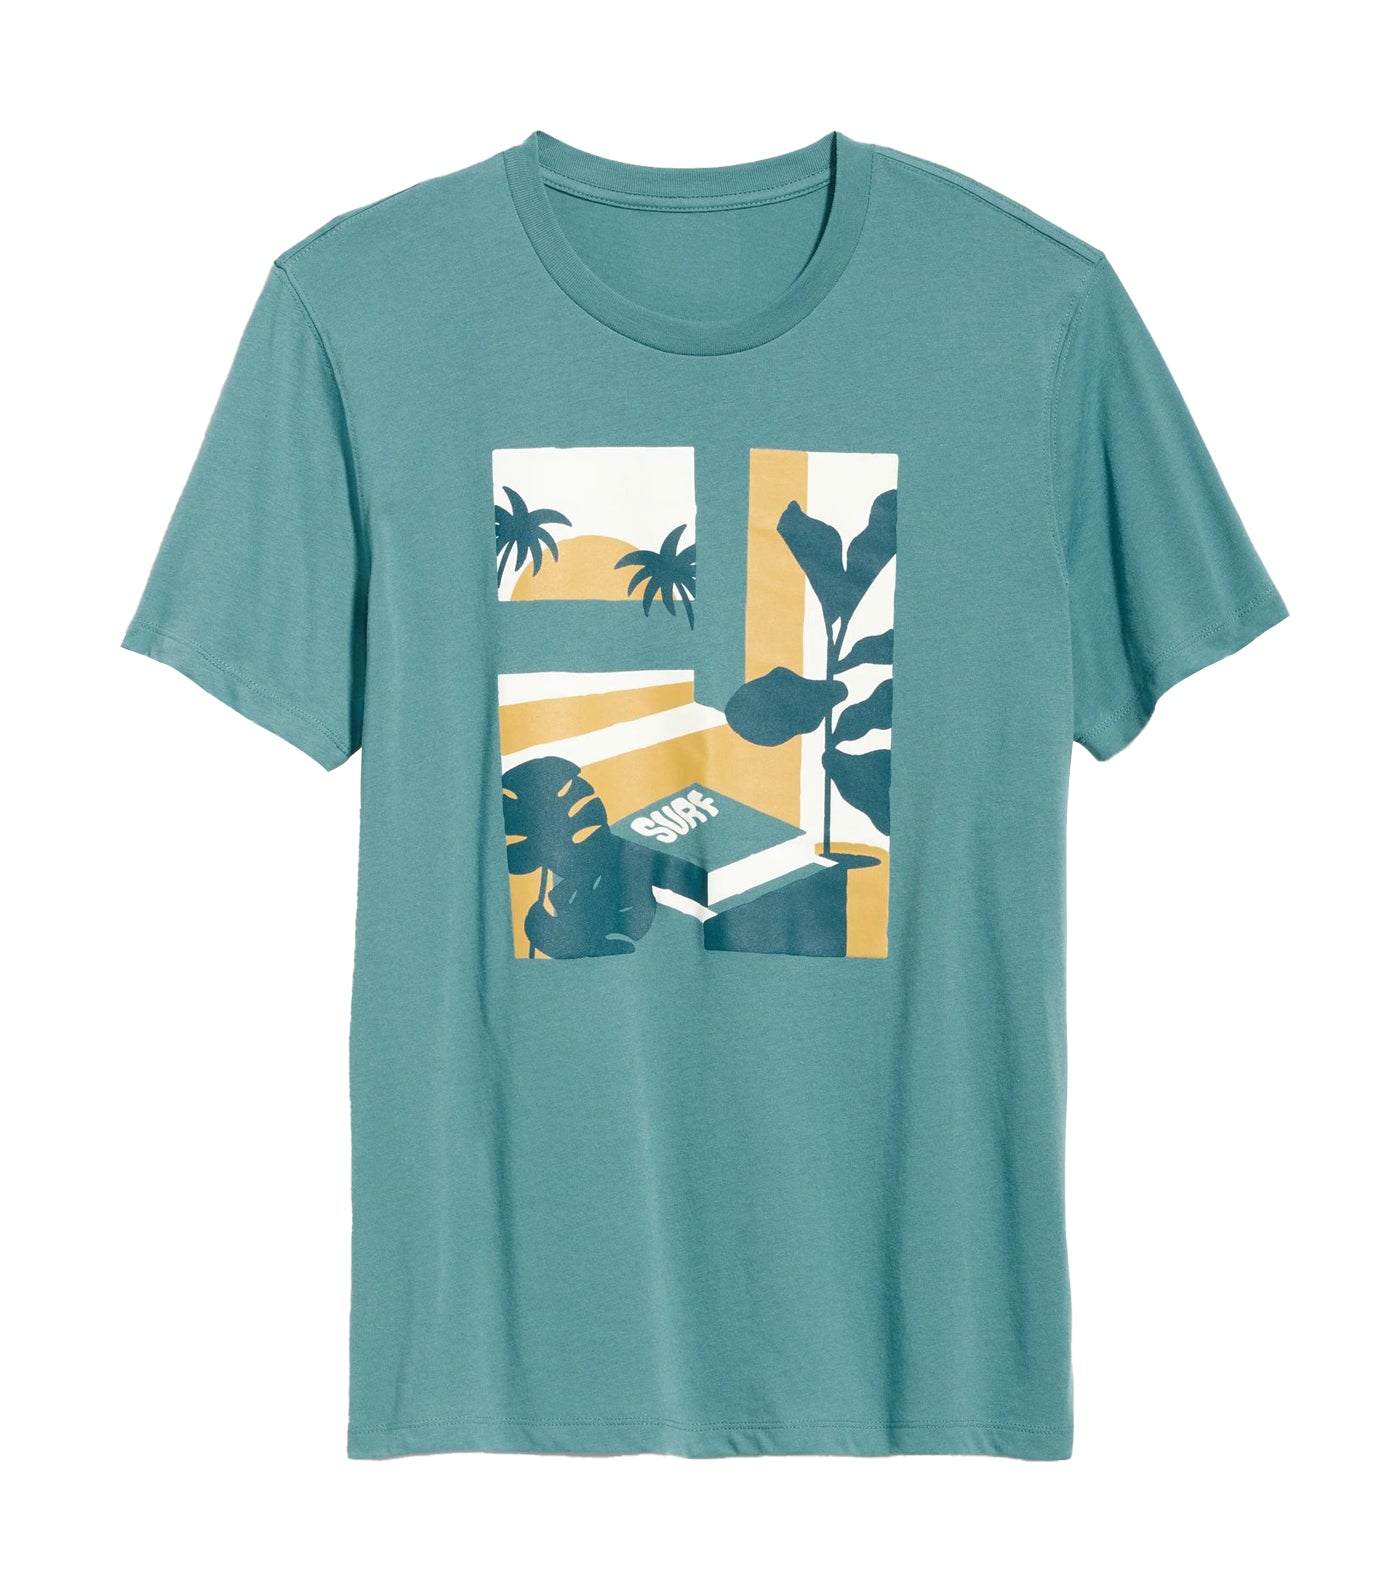 Soft-Washed Graphic T-Shirt for Men Tennessee Blue